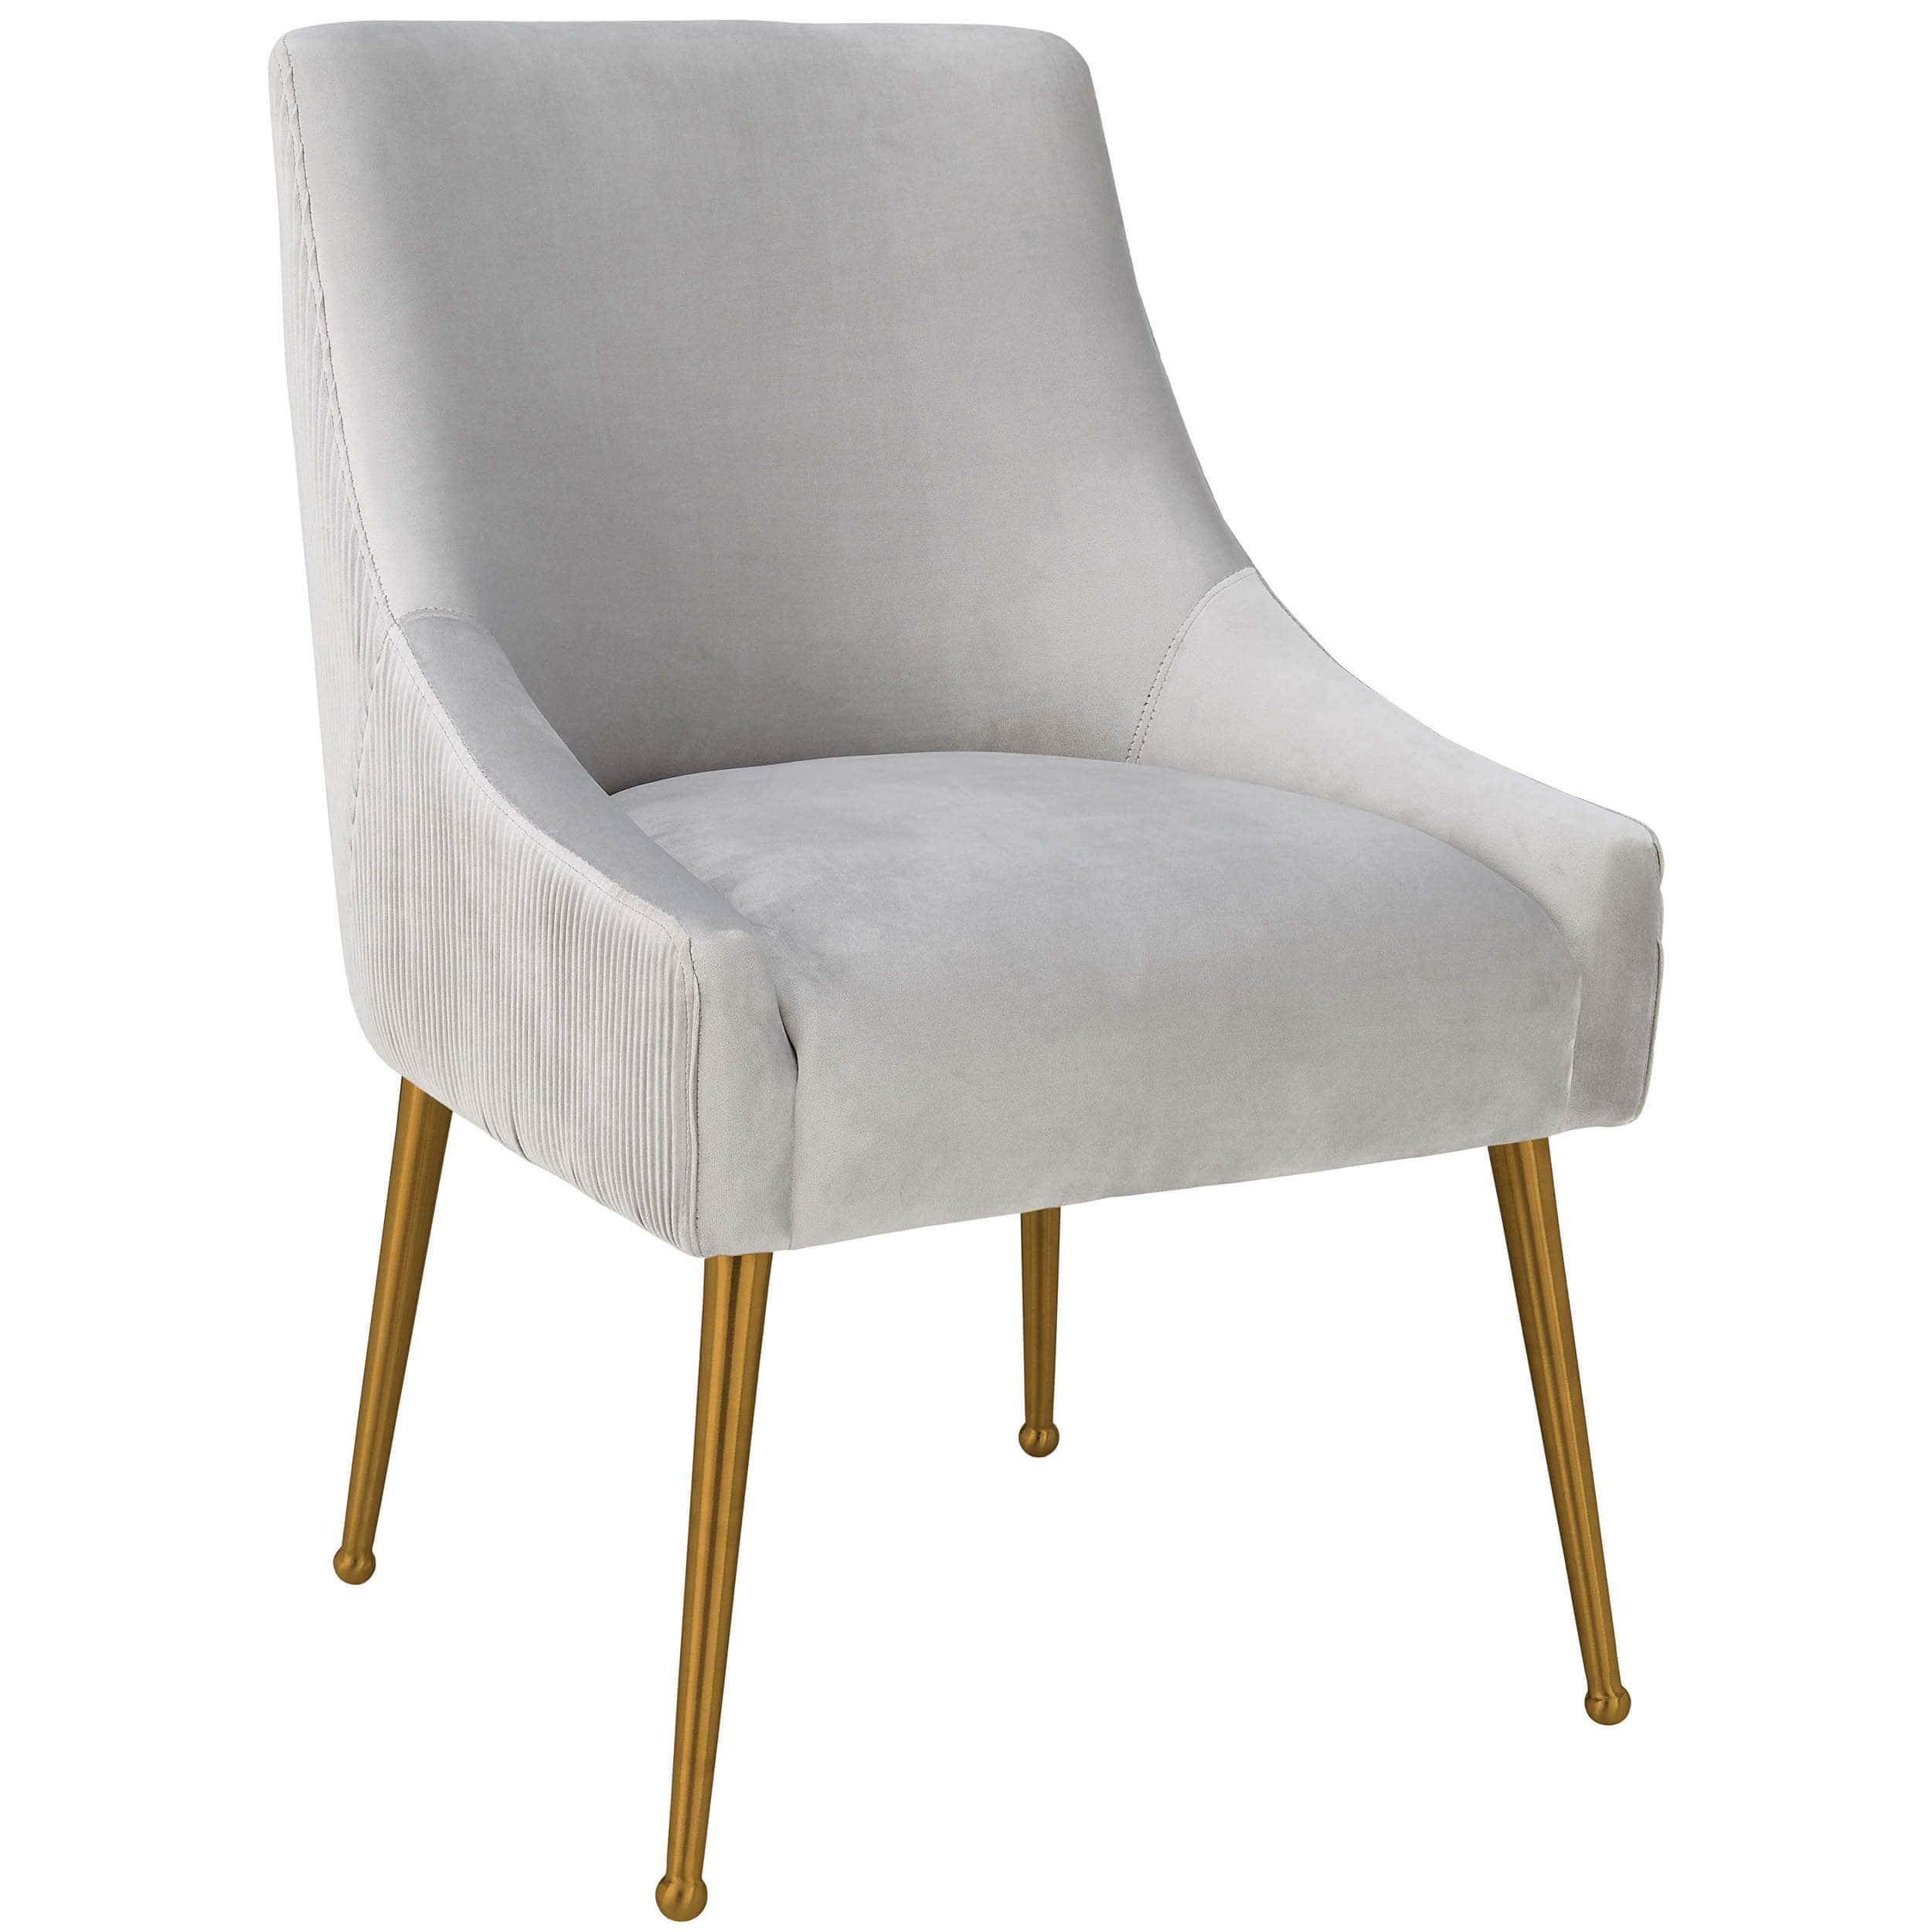 Image of Beatrix Pleated Chair, Light Grey/Brushed Gold Legs